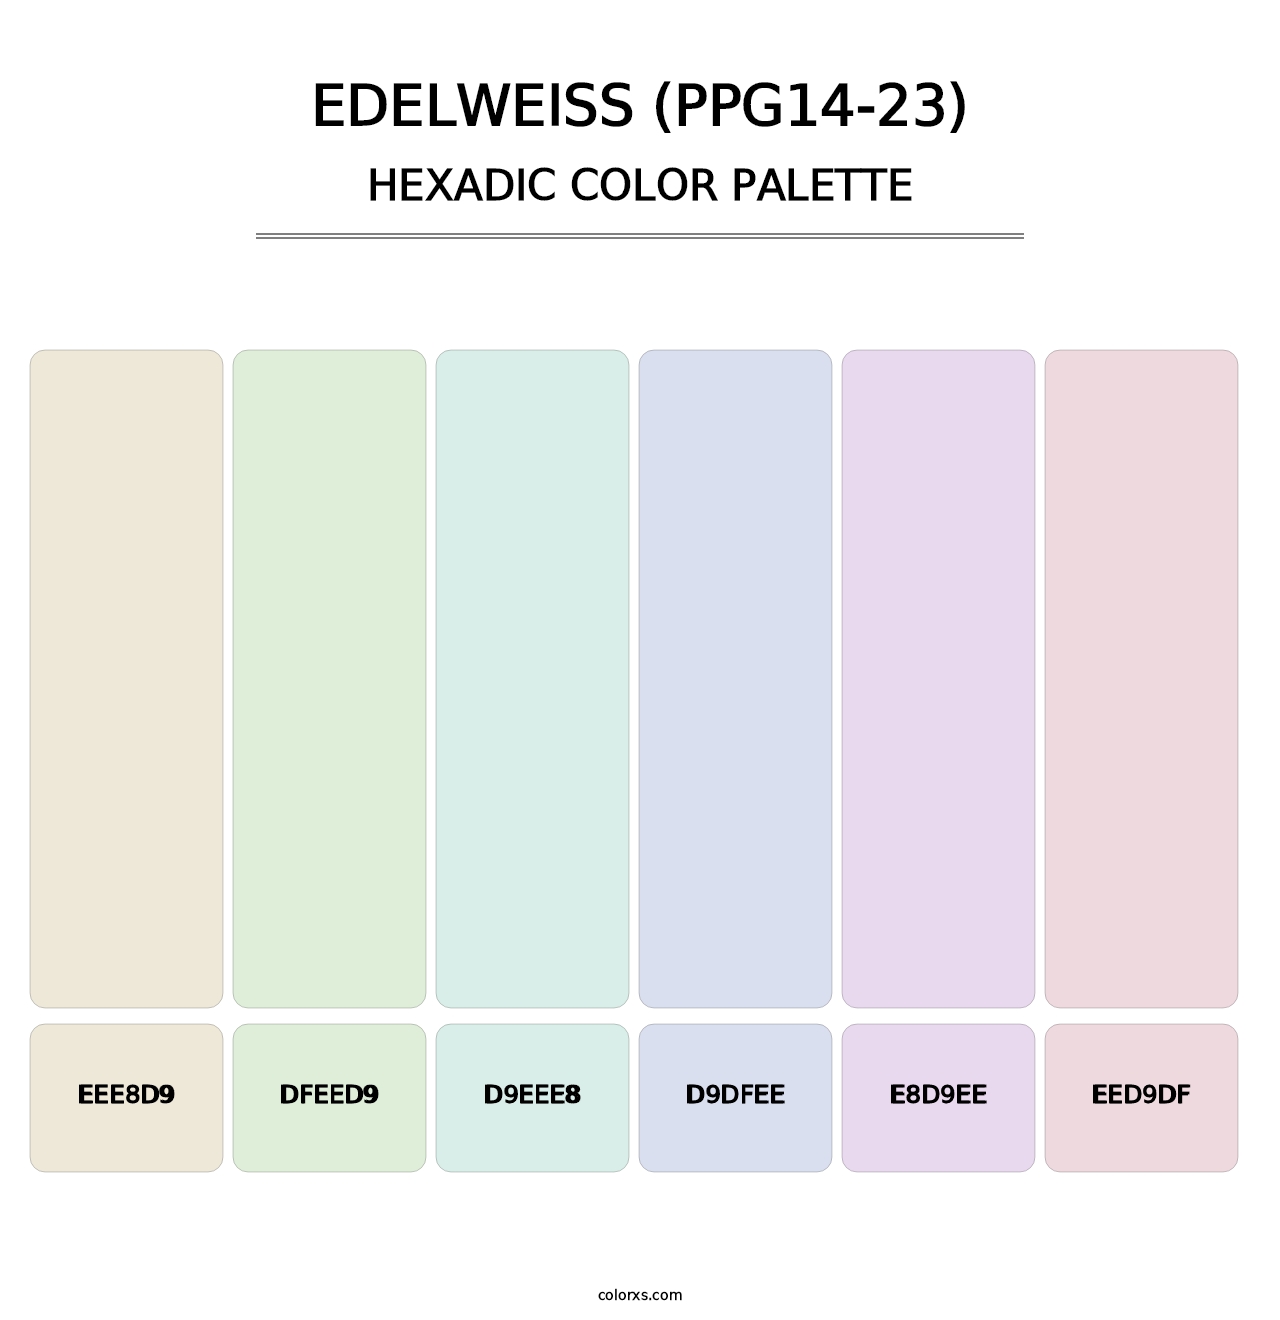 Edelweiss (PPG14-23) - Hexadic Color Palette